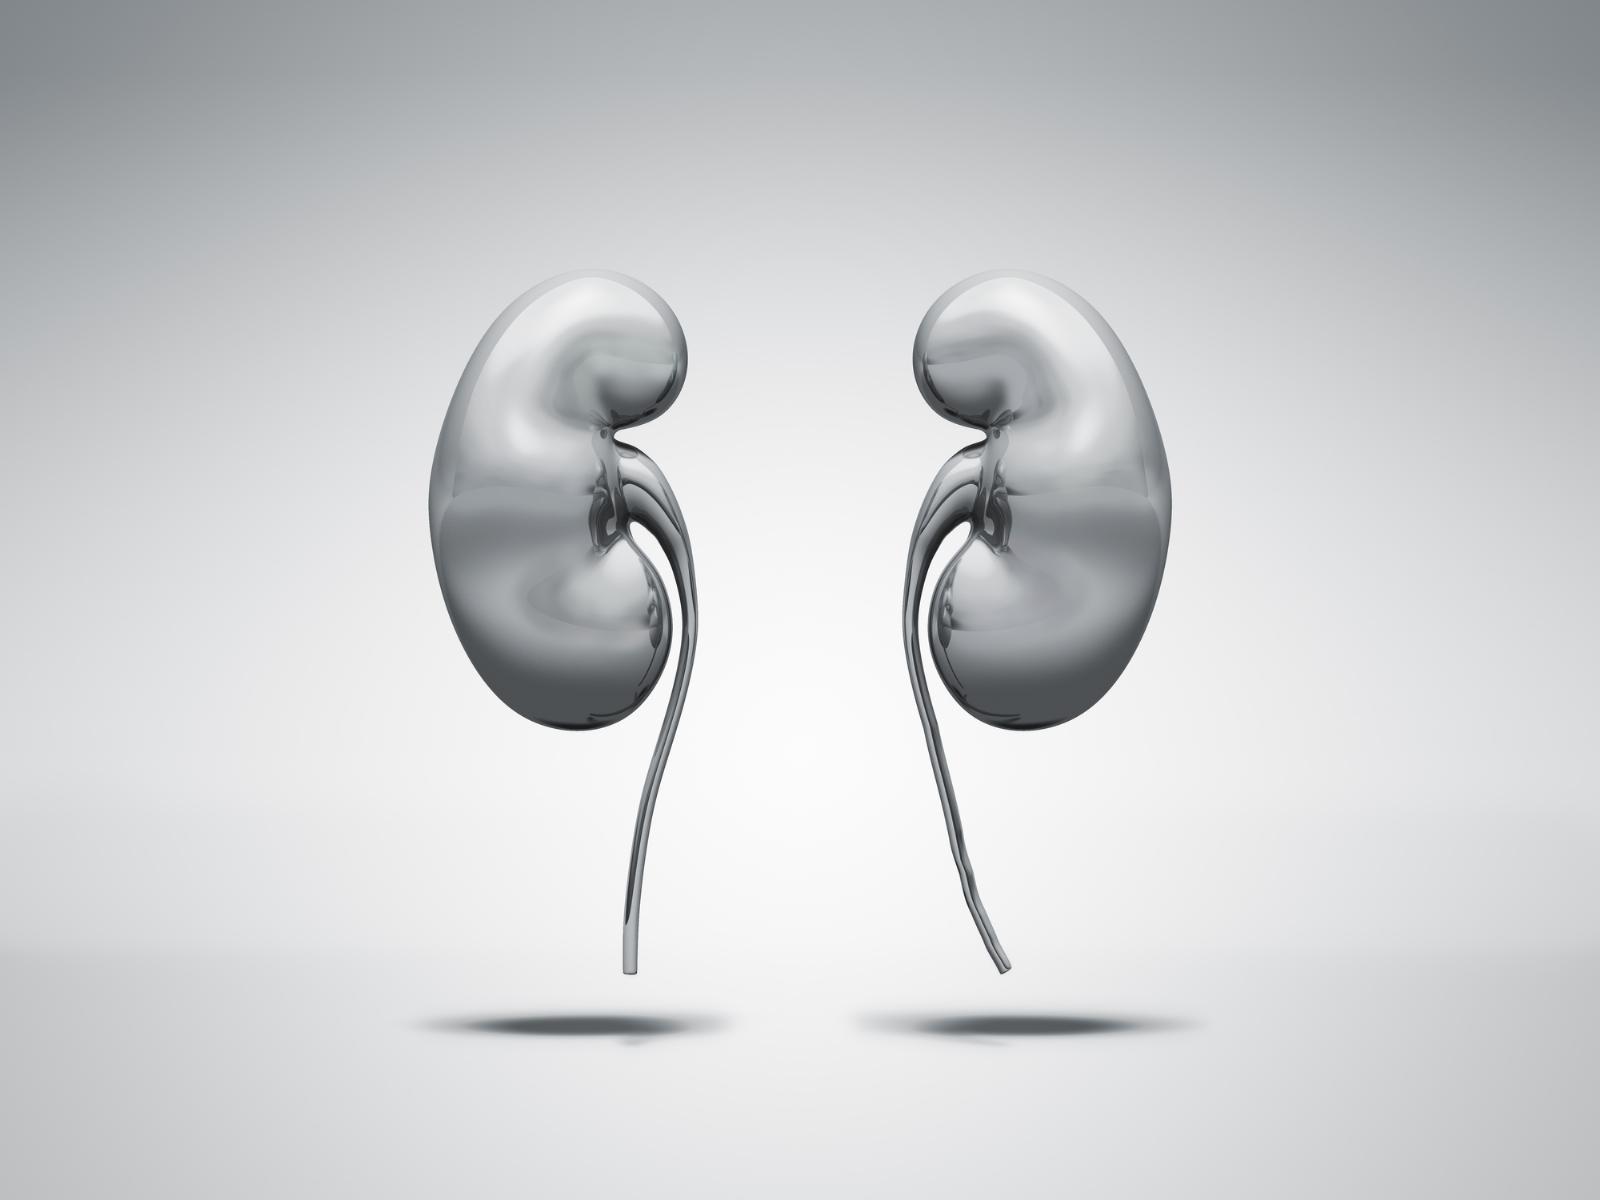 Strive Health grabs $166M to provide end-to-end kidney care